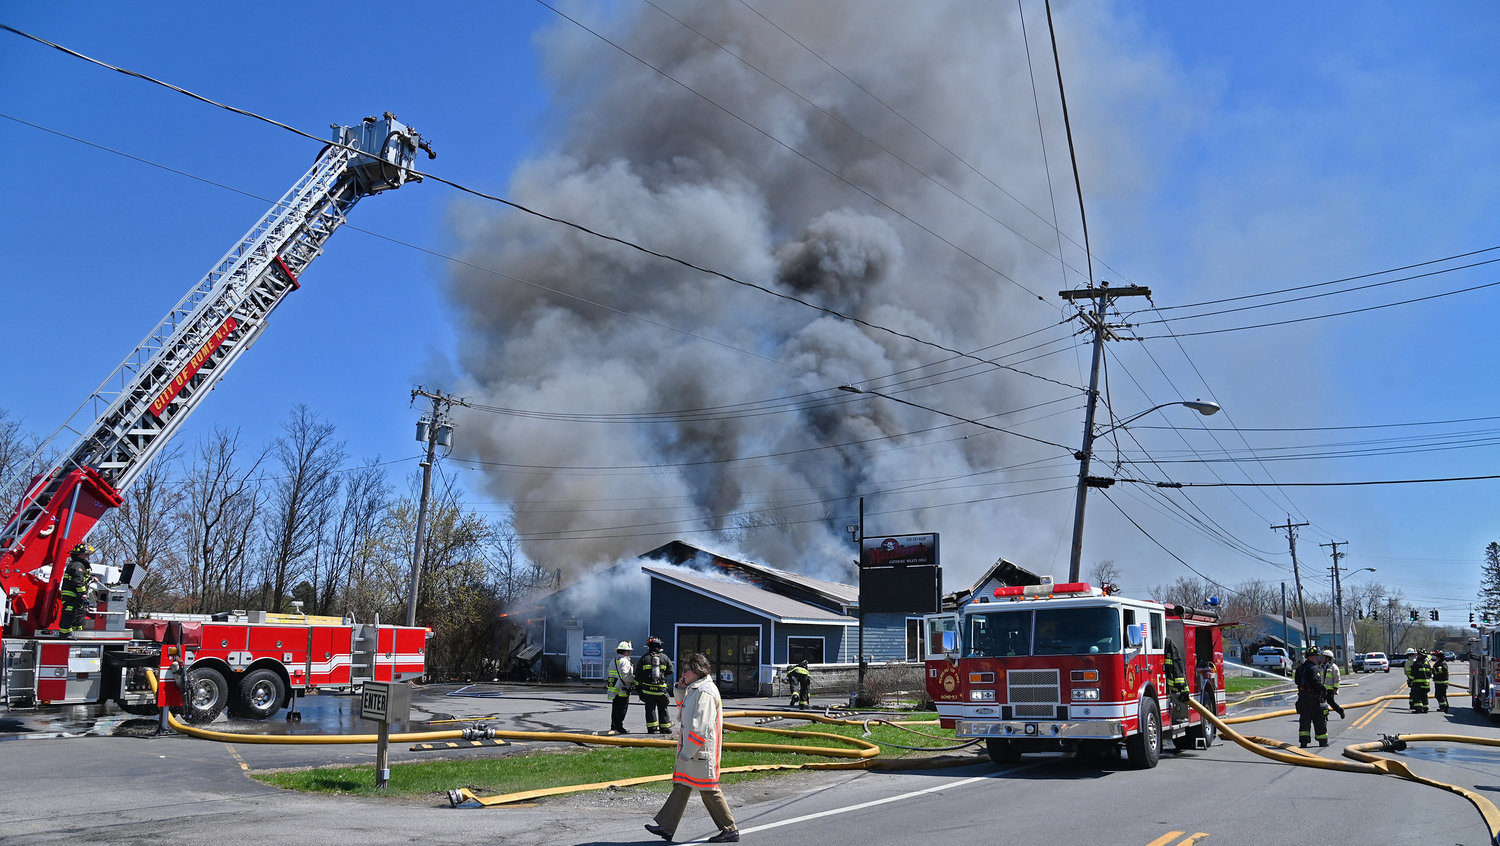 ATTACK FROM ALL SIDES — The Rome Fire Department's tower truck rises high above Mazzaferro's Meats & Deli in north Rome Friday afternoon, as city firefighters attack the blaze from all sides.